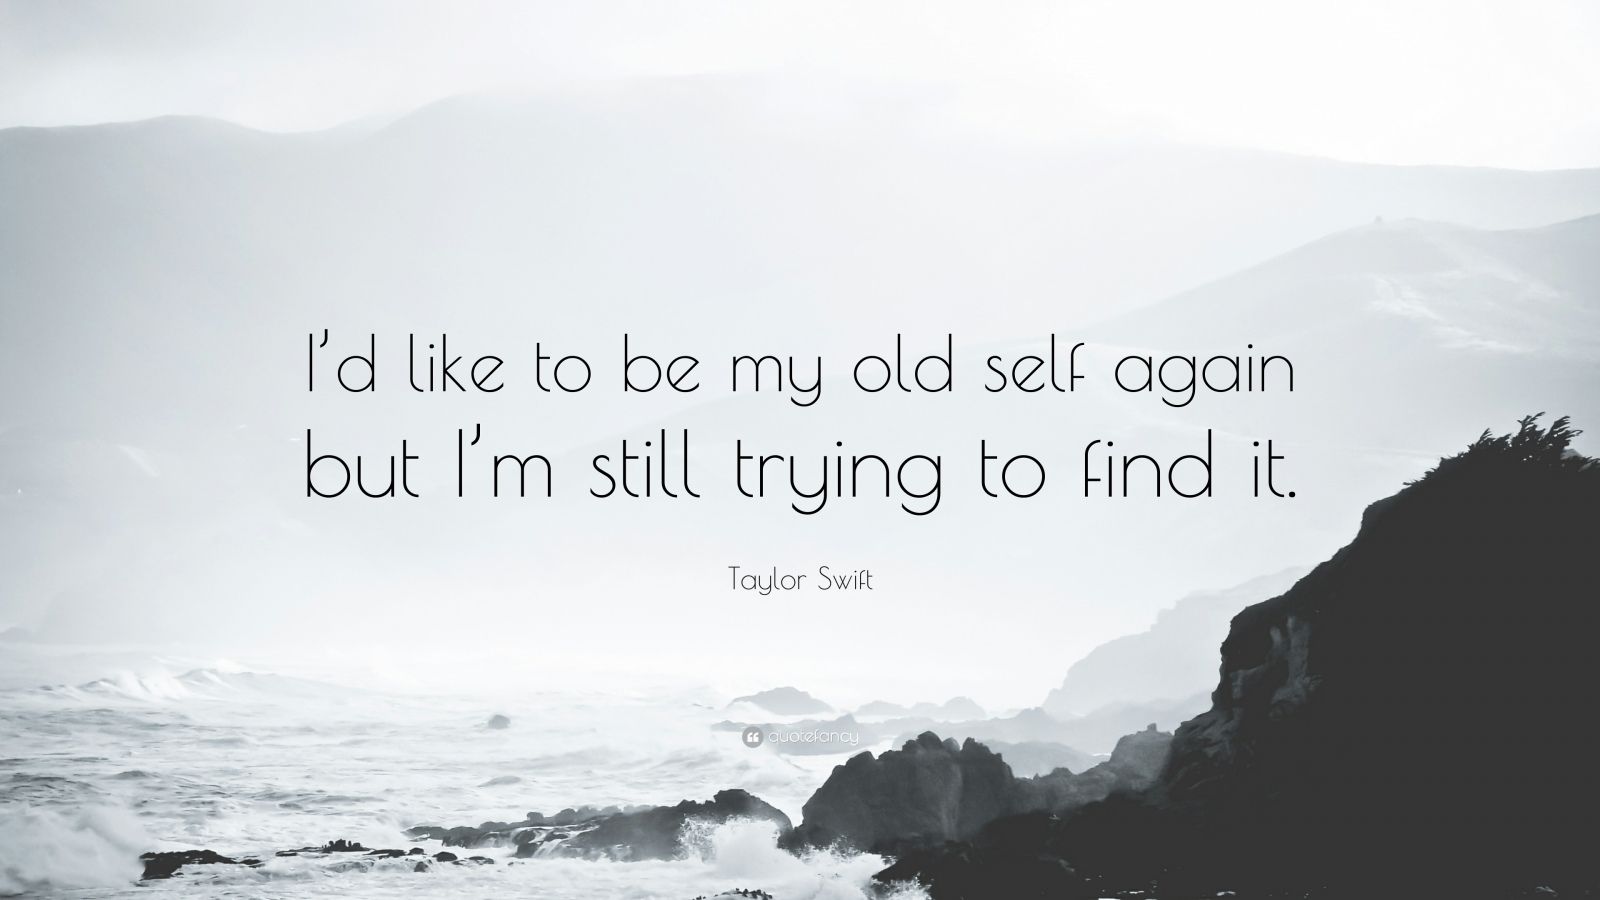 Taylor Swift Quote “id Like To Be My Old Self Again But Im Still